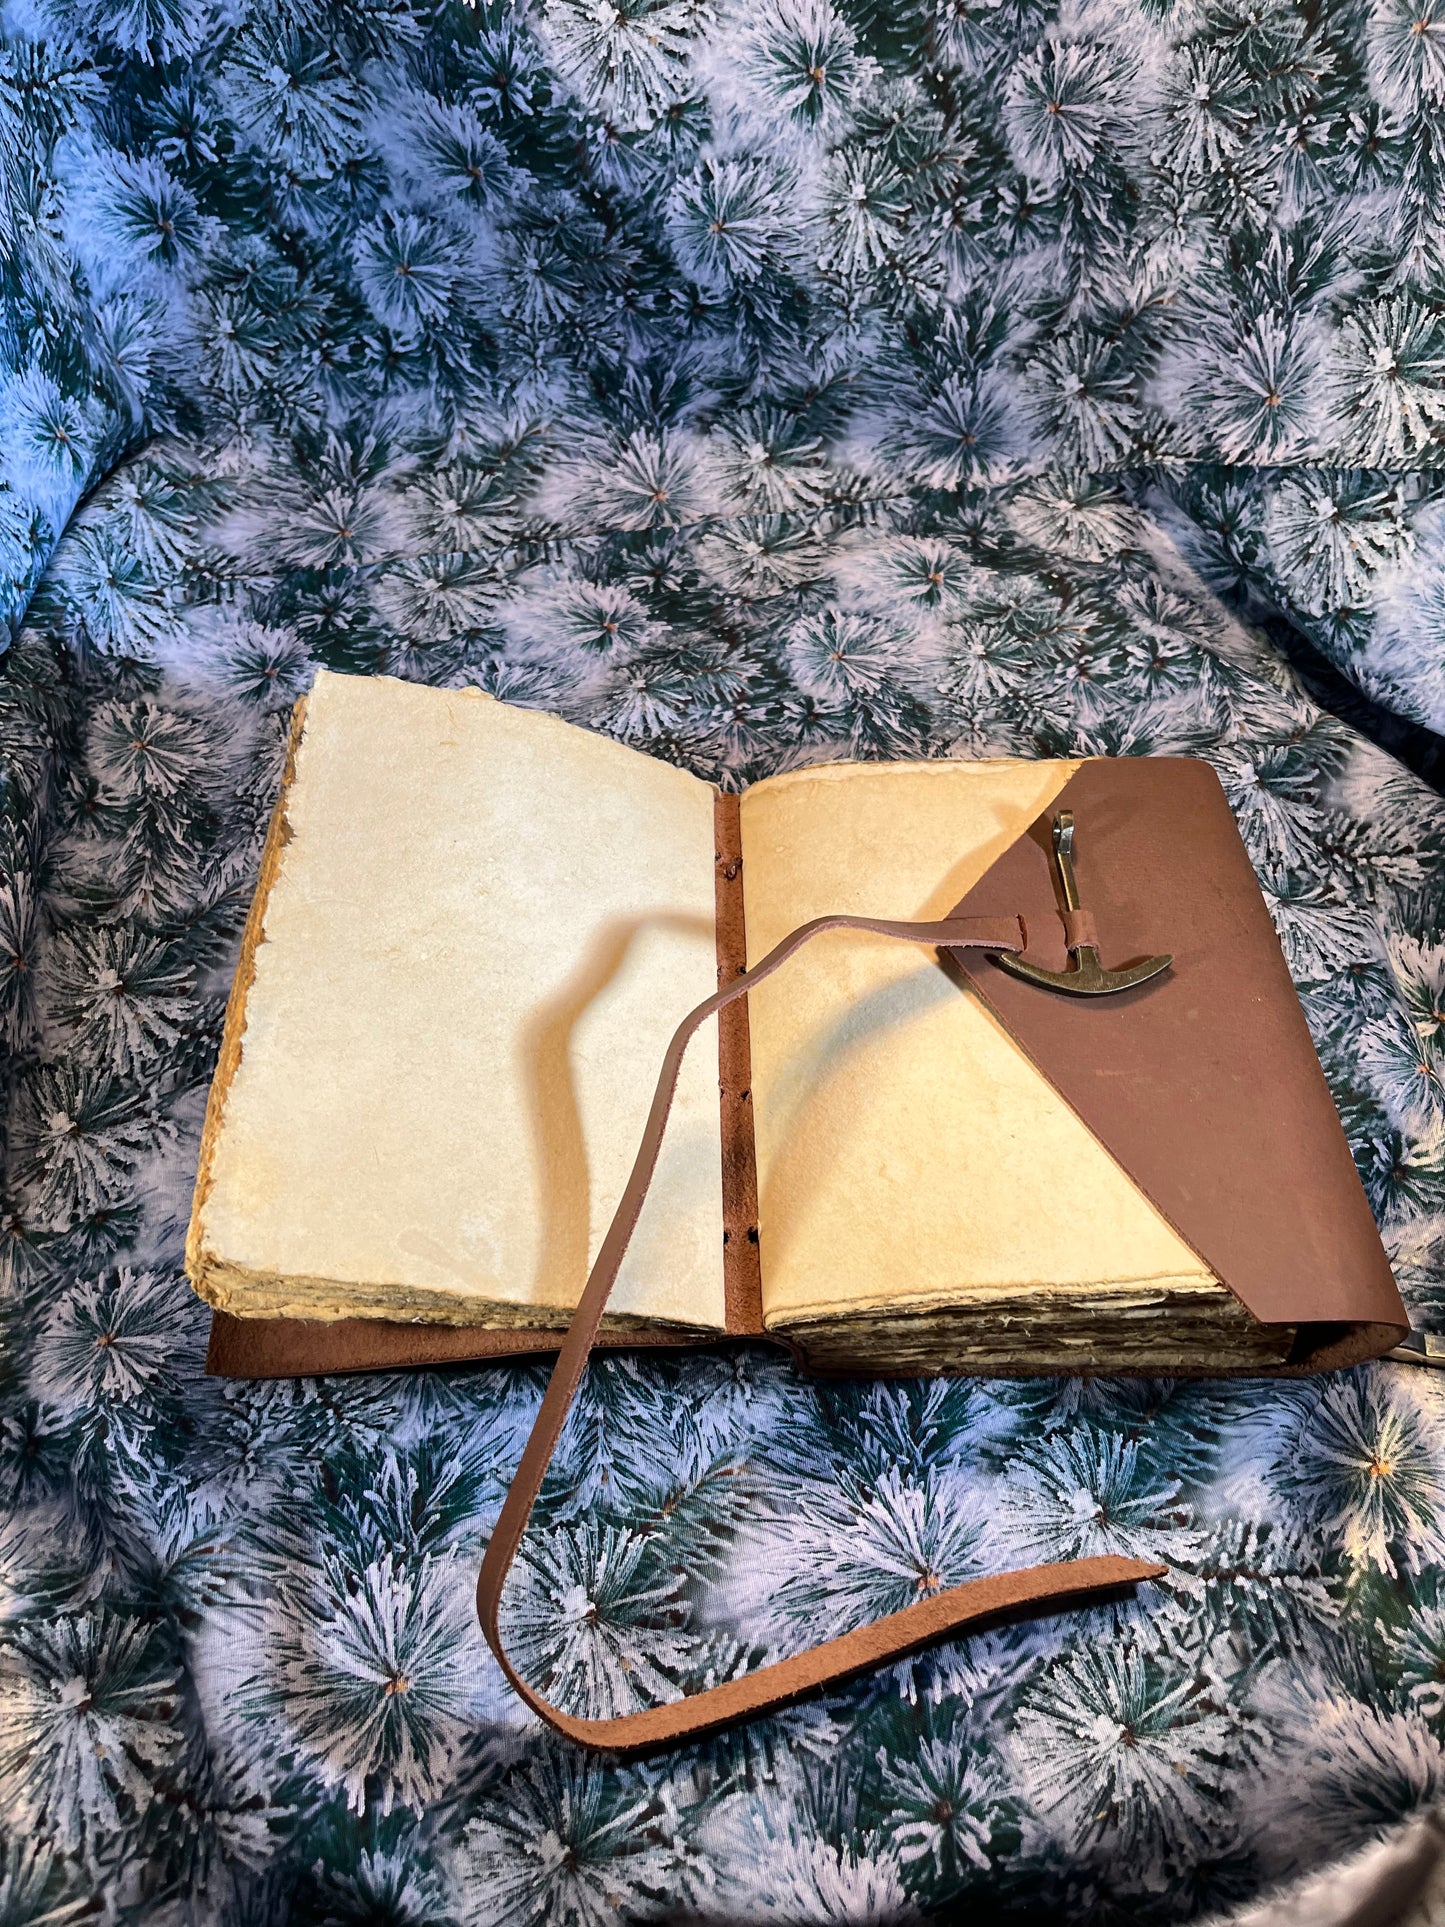 Captain's Journal Book in Dark Brown Leather with anchor on cover